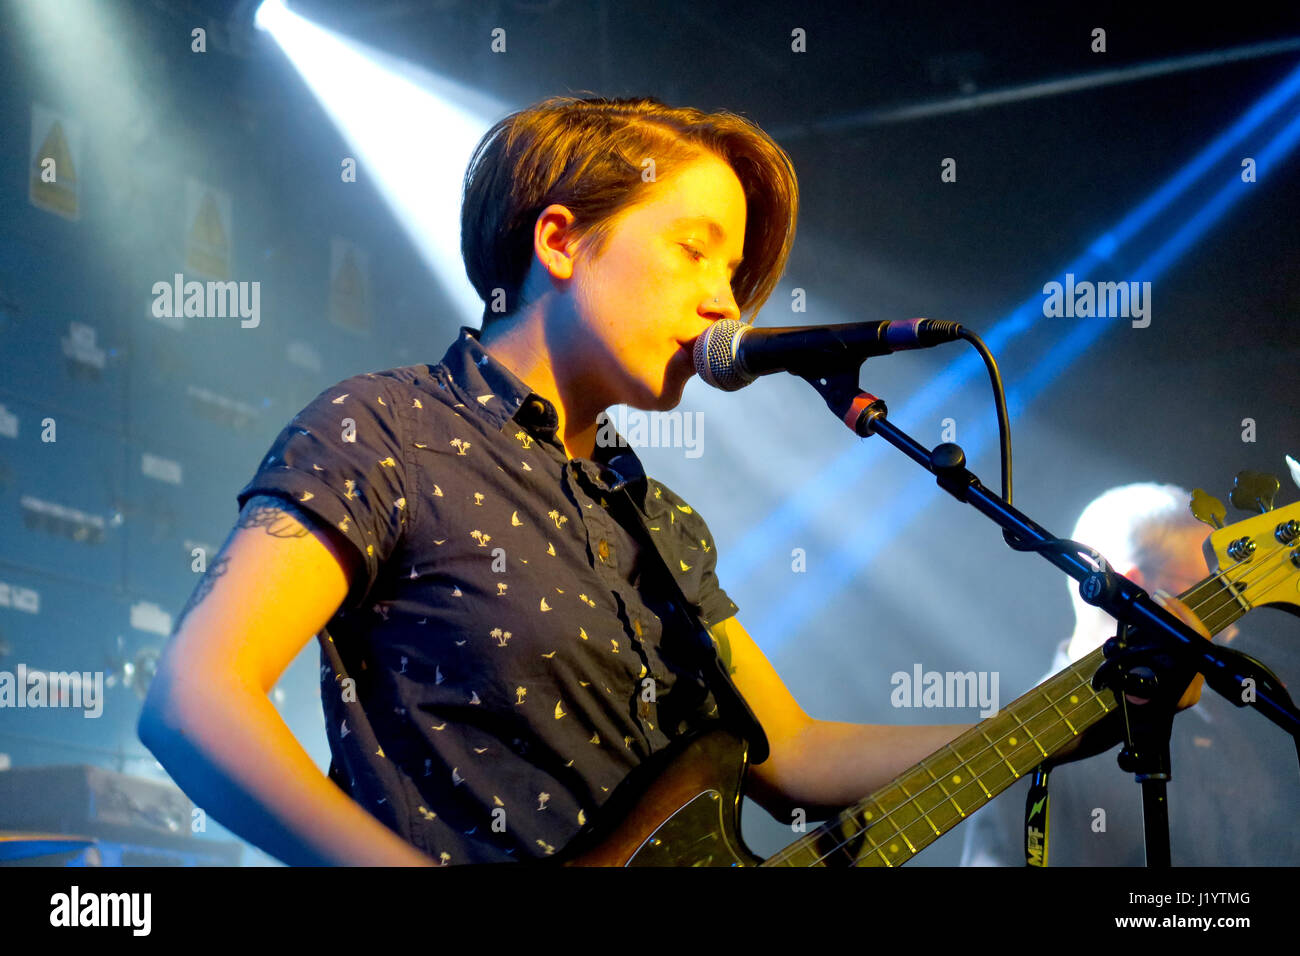 Manchester, UK. 22nd April, 2017. Naomi Griffin  of Martha the County Durham indie pop punk band performing live in concert at Gorilla in Manchester as part of the Manchester Punk Fest (22.04.2017) Credit: Chris Rogers/Alamy Live News Stock Photo